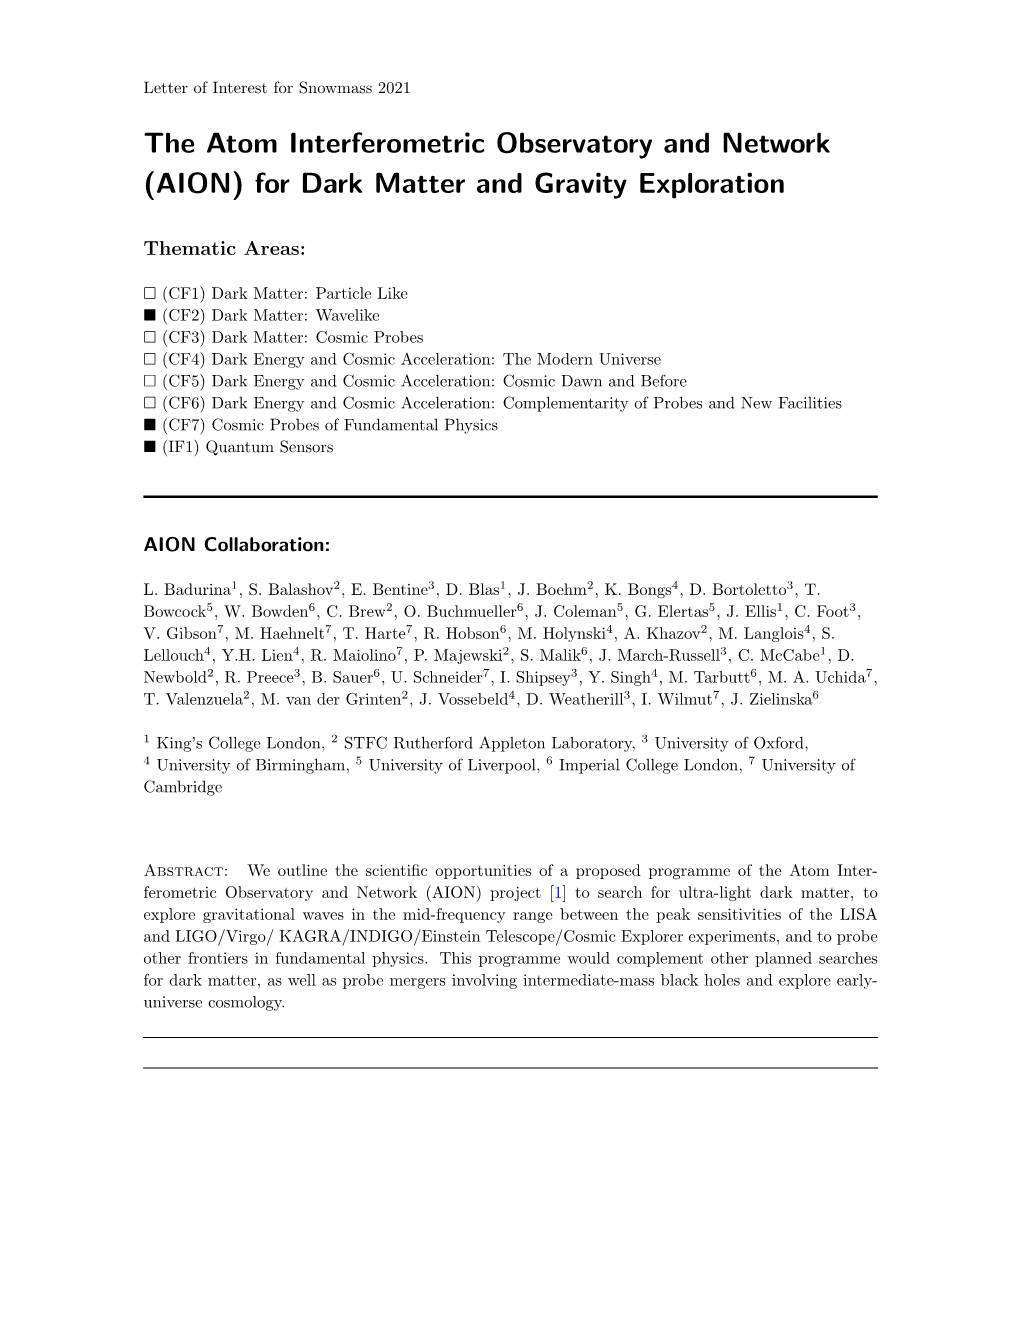 The Atom Interferometric Observatory and Network (AION) for Dark Matter and Gravity Exploration